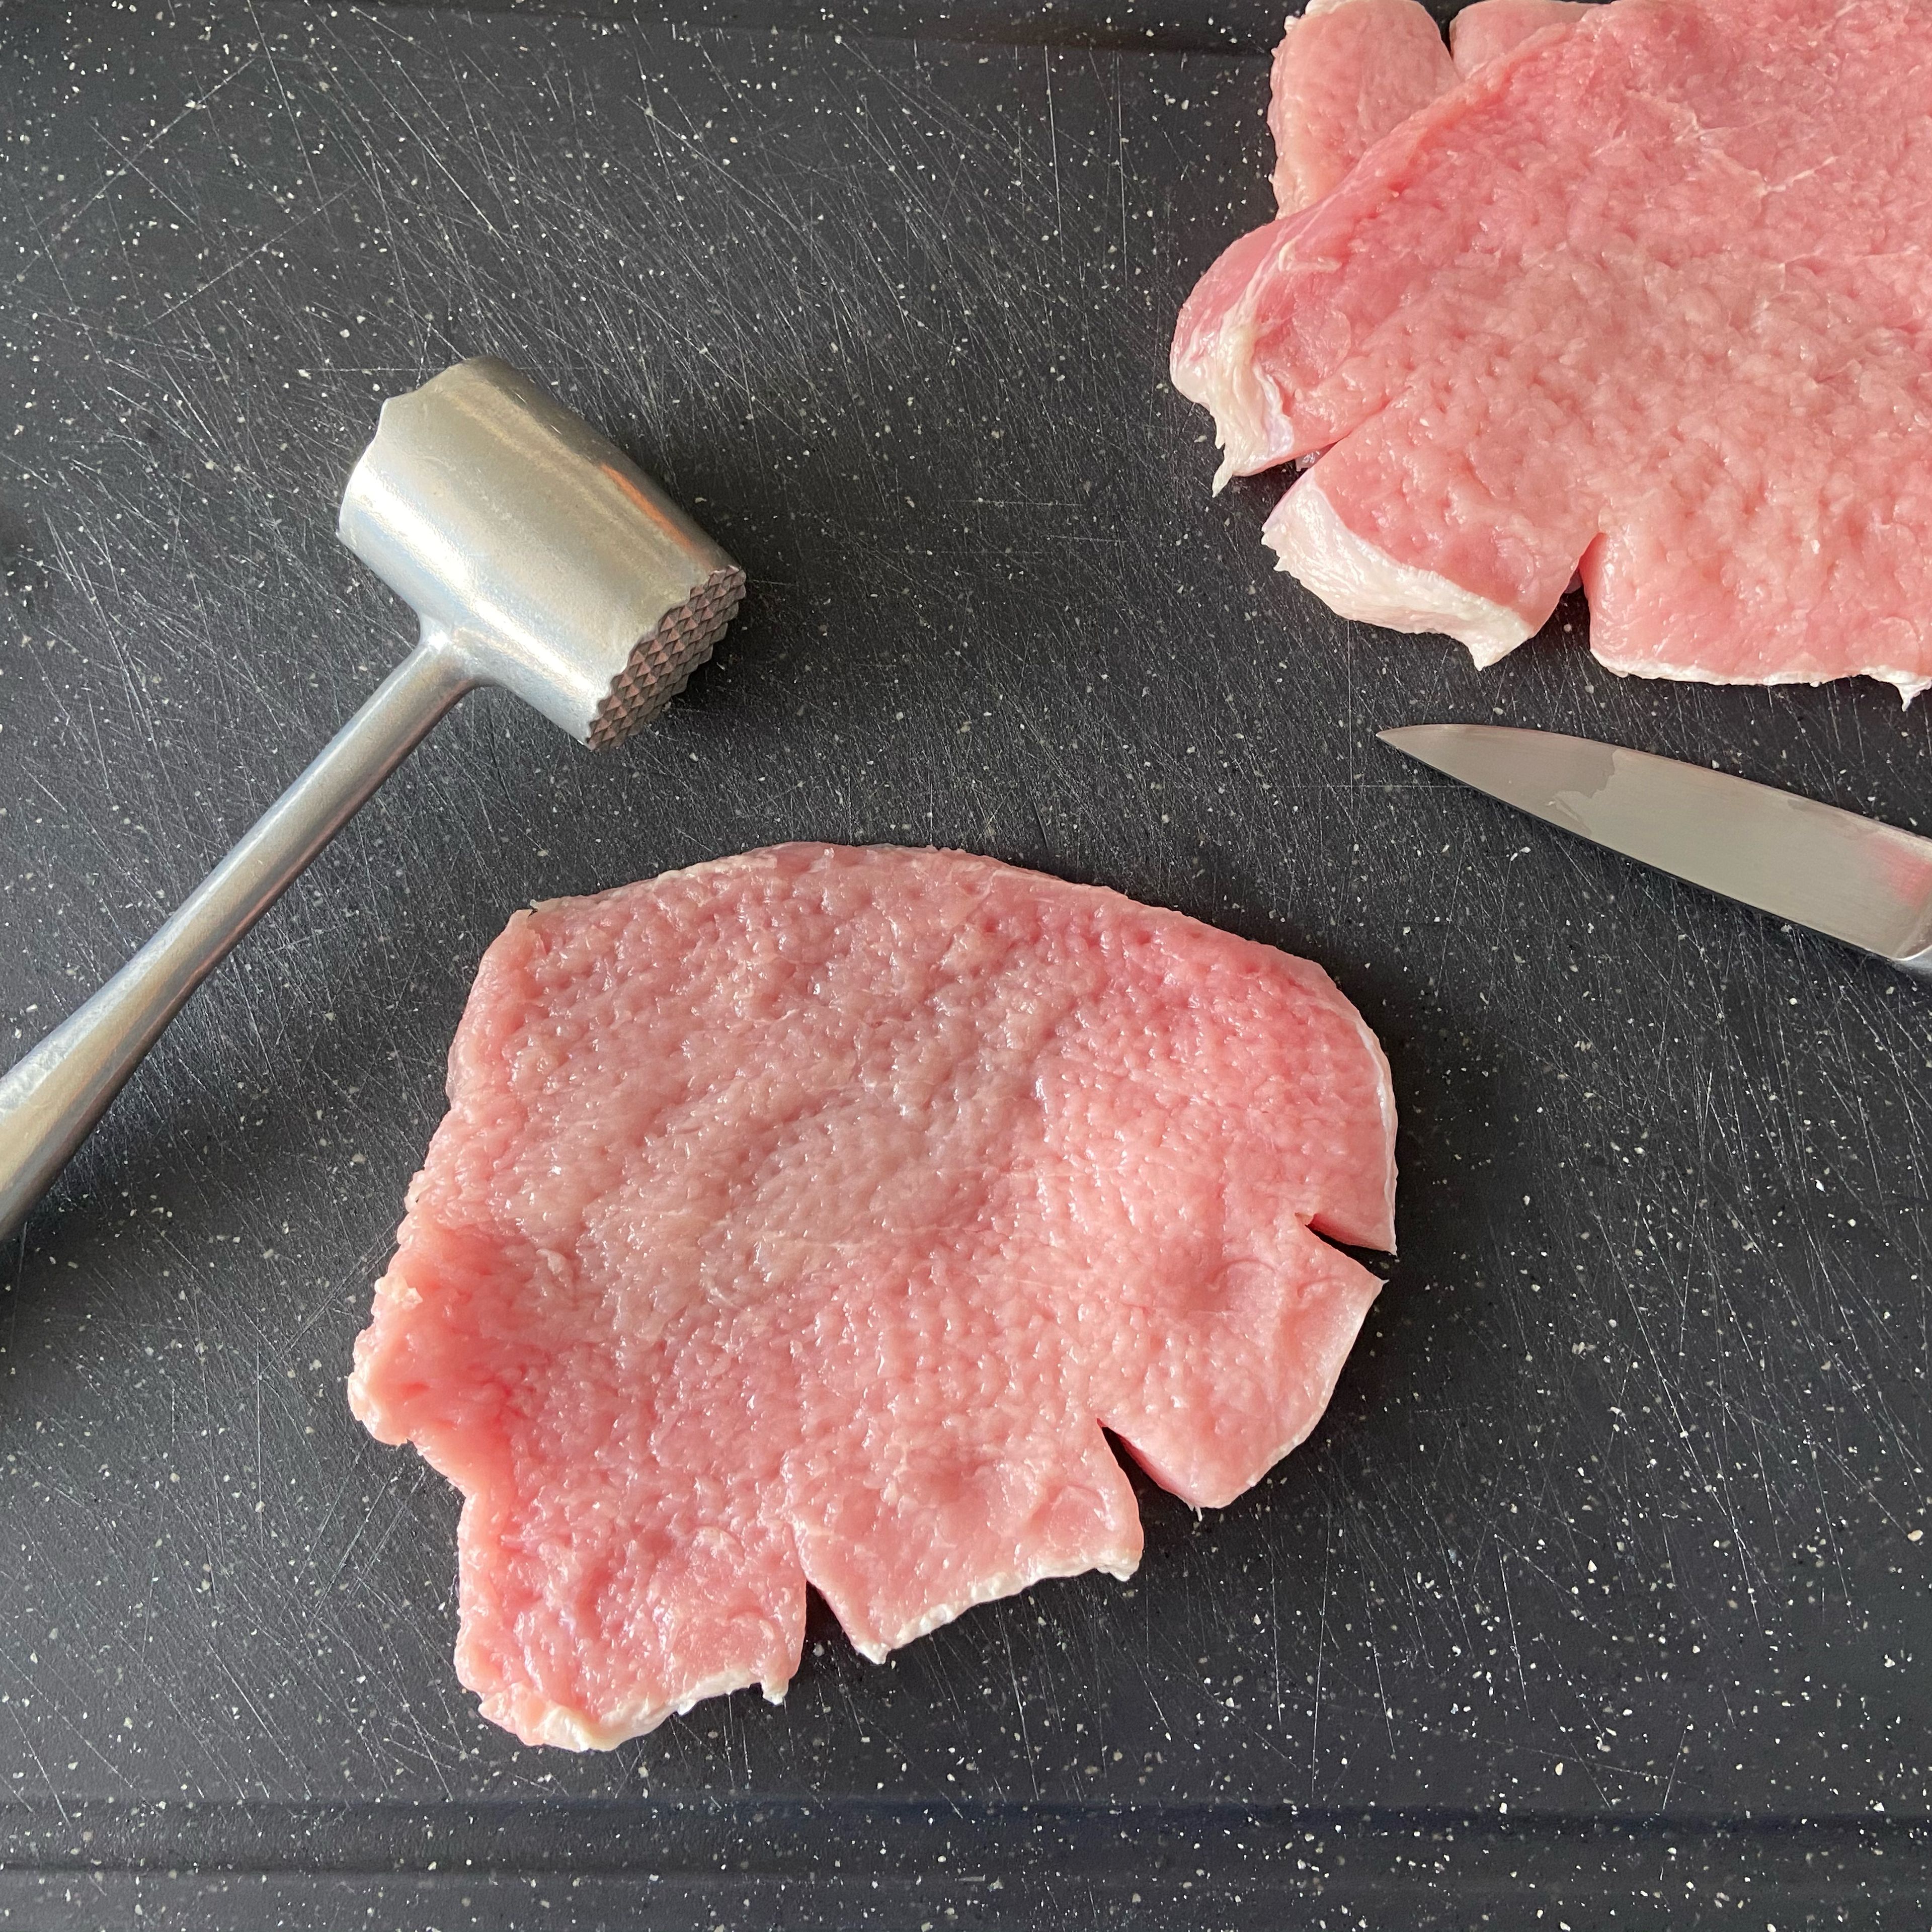 Cut some small slits in the fat side of the pork cutlet and then use a tenderizer to flatten the cutlet into an even thickness. It should be about 1/2 inch or less. The slits are to prevent shrinkage and curling when the cutlet cooks. 